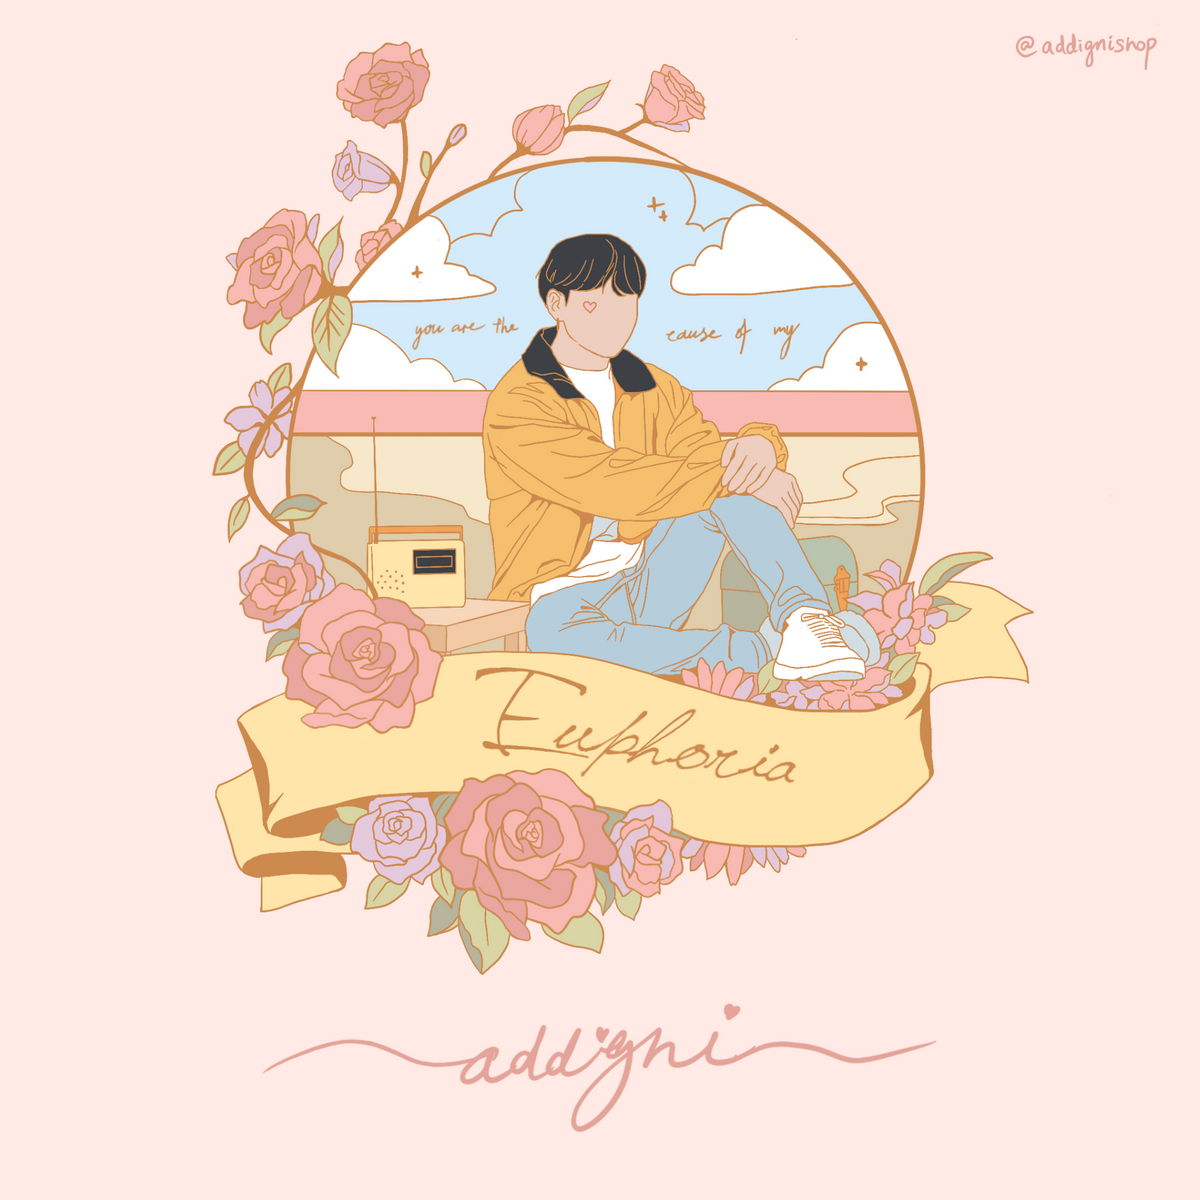 BTS Jungkook you are the cause of my euphoria - Bts Jungkook